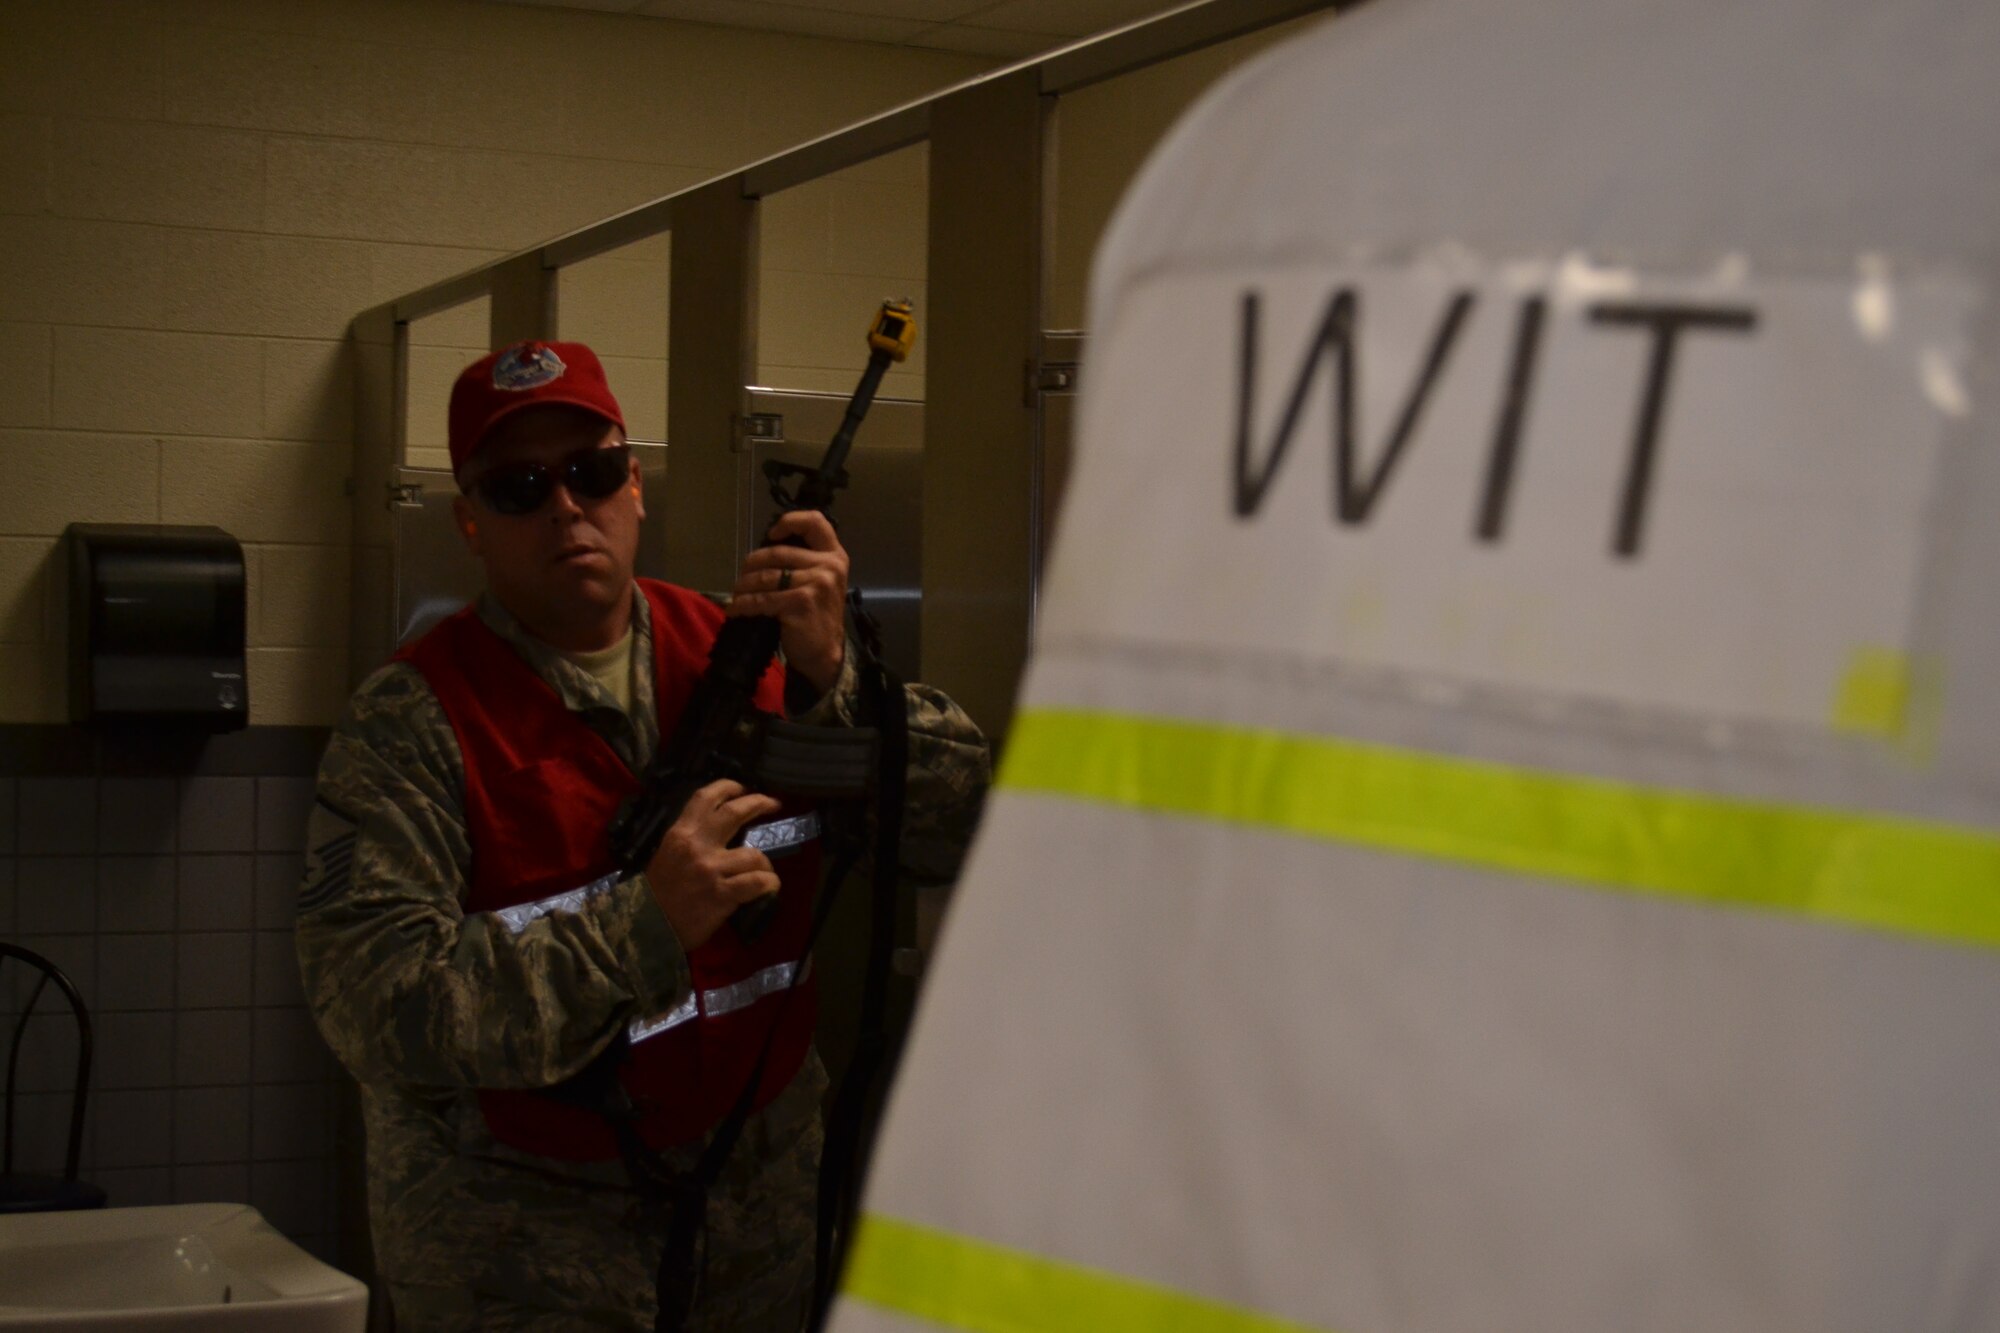 Master Sgt. Geoffrey Gay, a 201st RED HORSE, Det.1 member, plays the part of an active shooter while a wing inspection team (WIT) member watches during a major accident response exercise held at Horsham Air Guard Station, Pa., April 13, 2016. Members of both the Horsham Police Department and the 111th Security Forces Squadron from Horsham AGS worked together to neutralize the dangerous scenario. (U.S. Air National Guard photo by Tech. Sgt. Andria Allmond)
